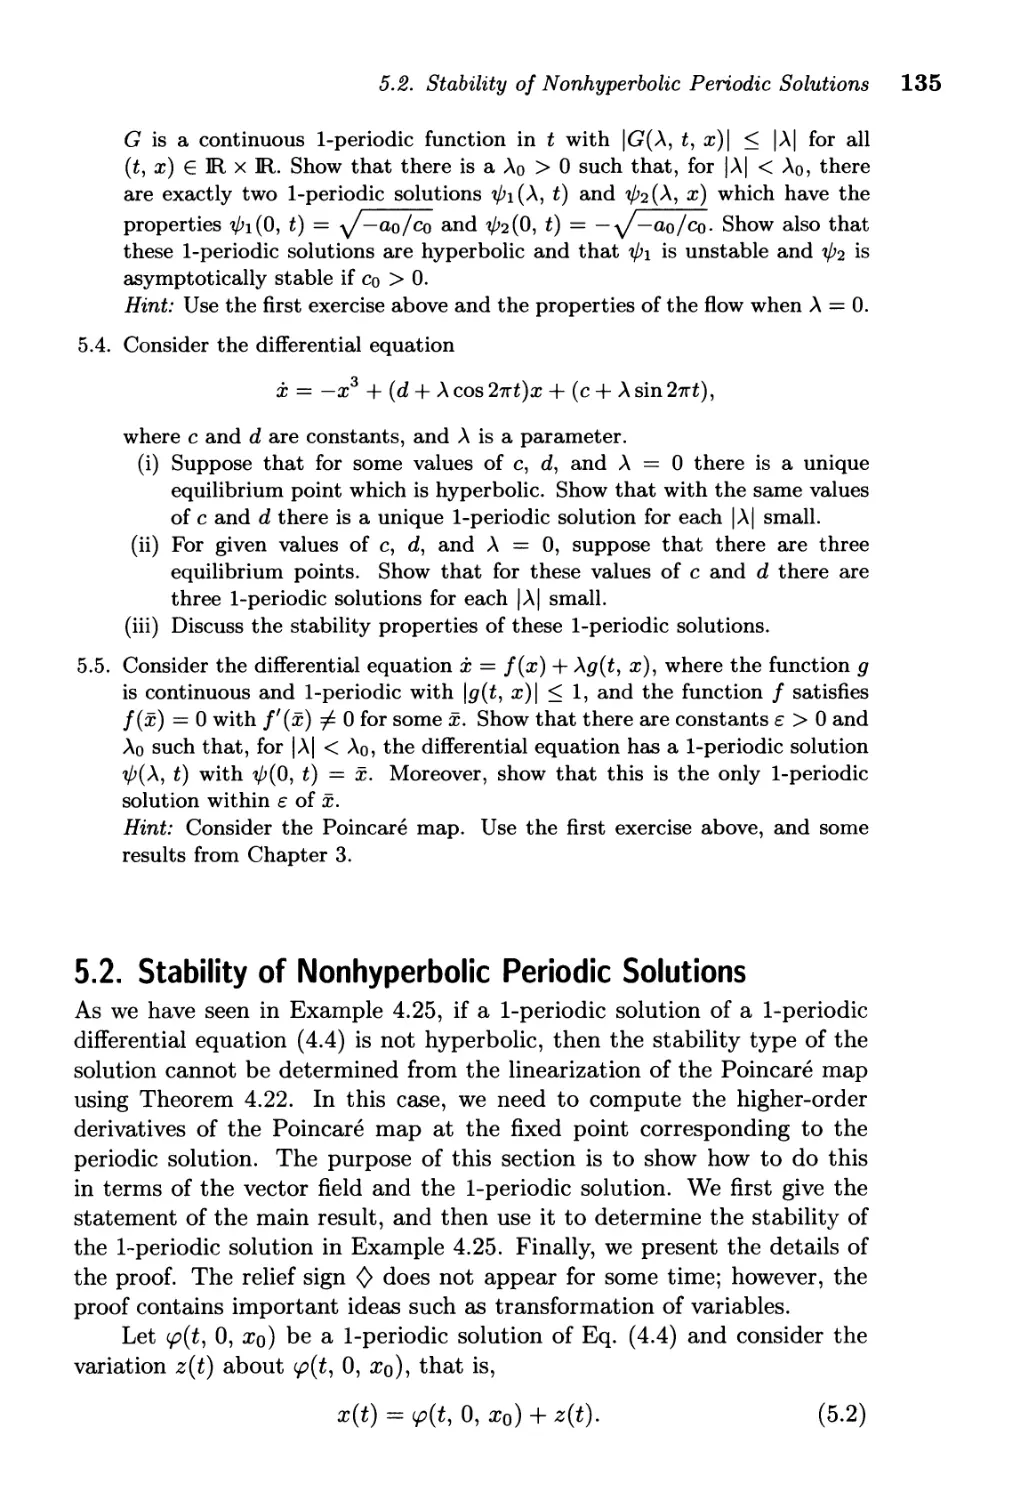 5.2. Stability of Nonhyperbolic Periodic Solutions